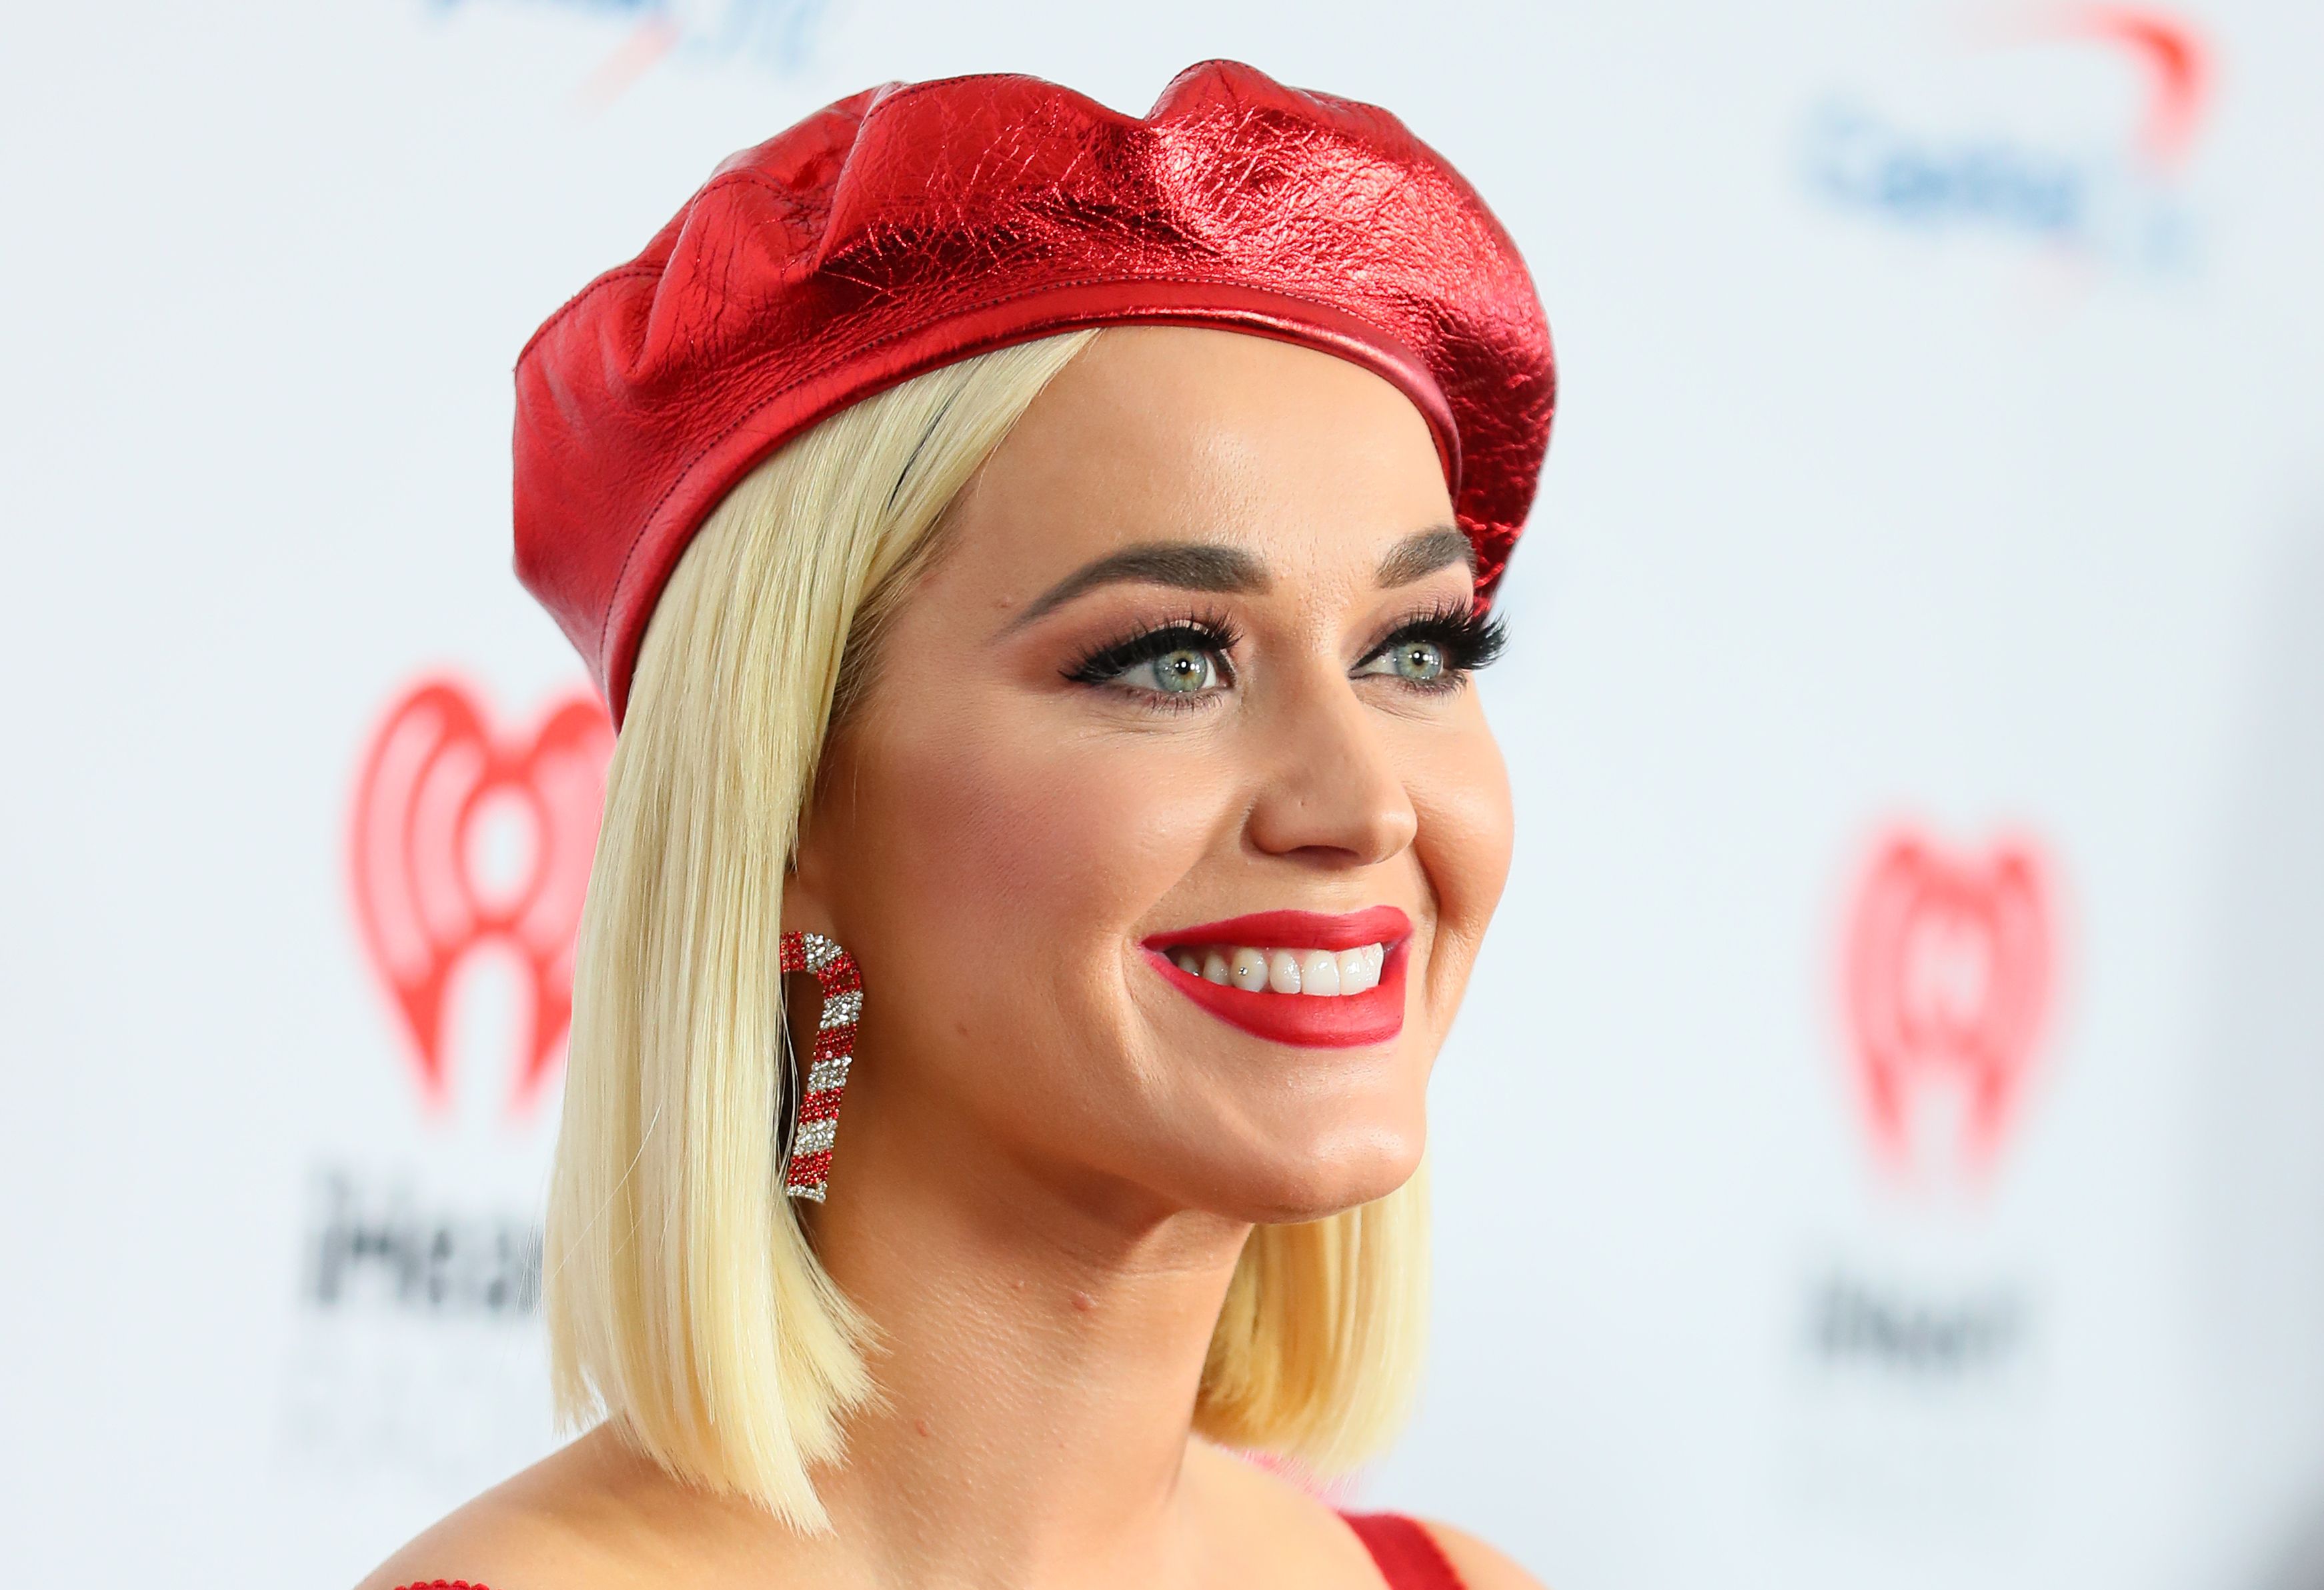 Katy Perry Shares Her Skincare Routine For Glowing Skin